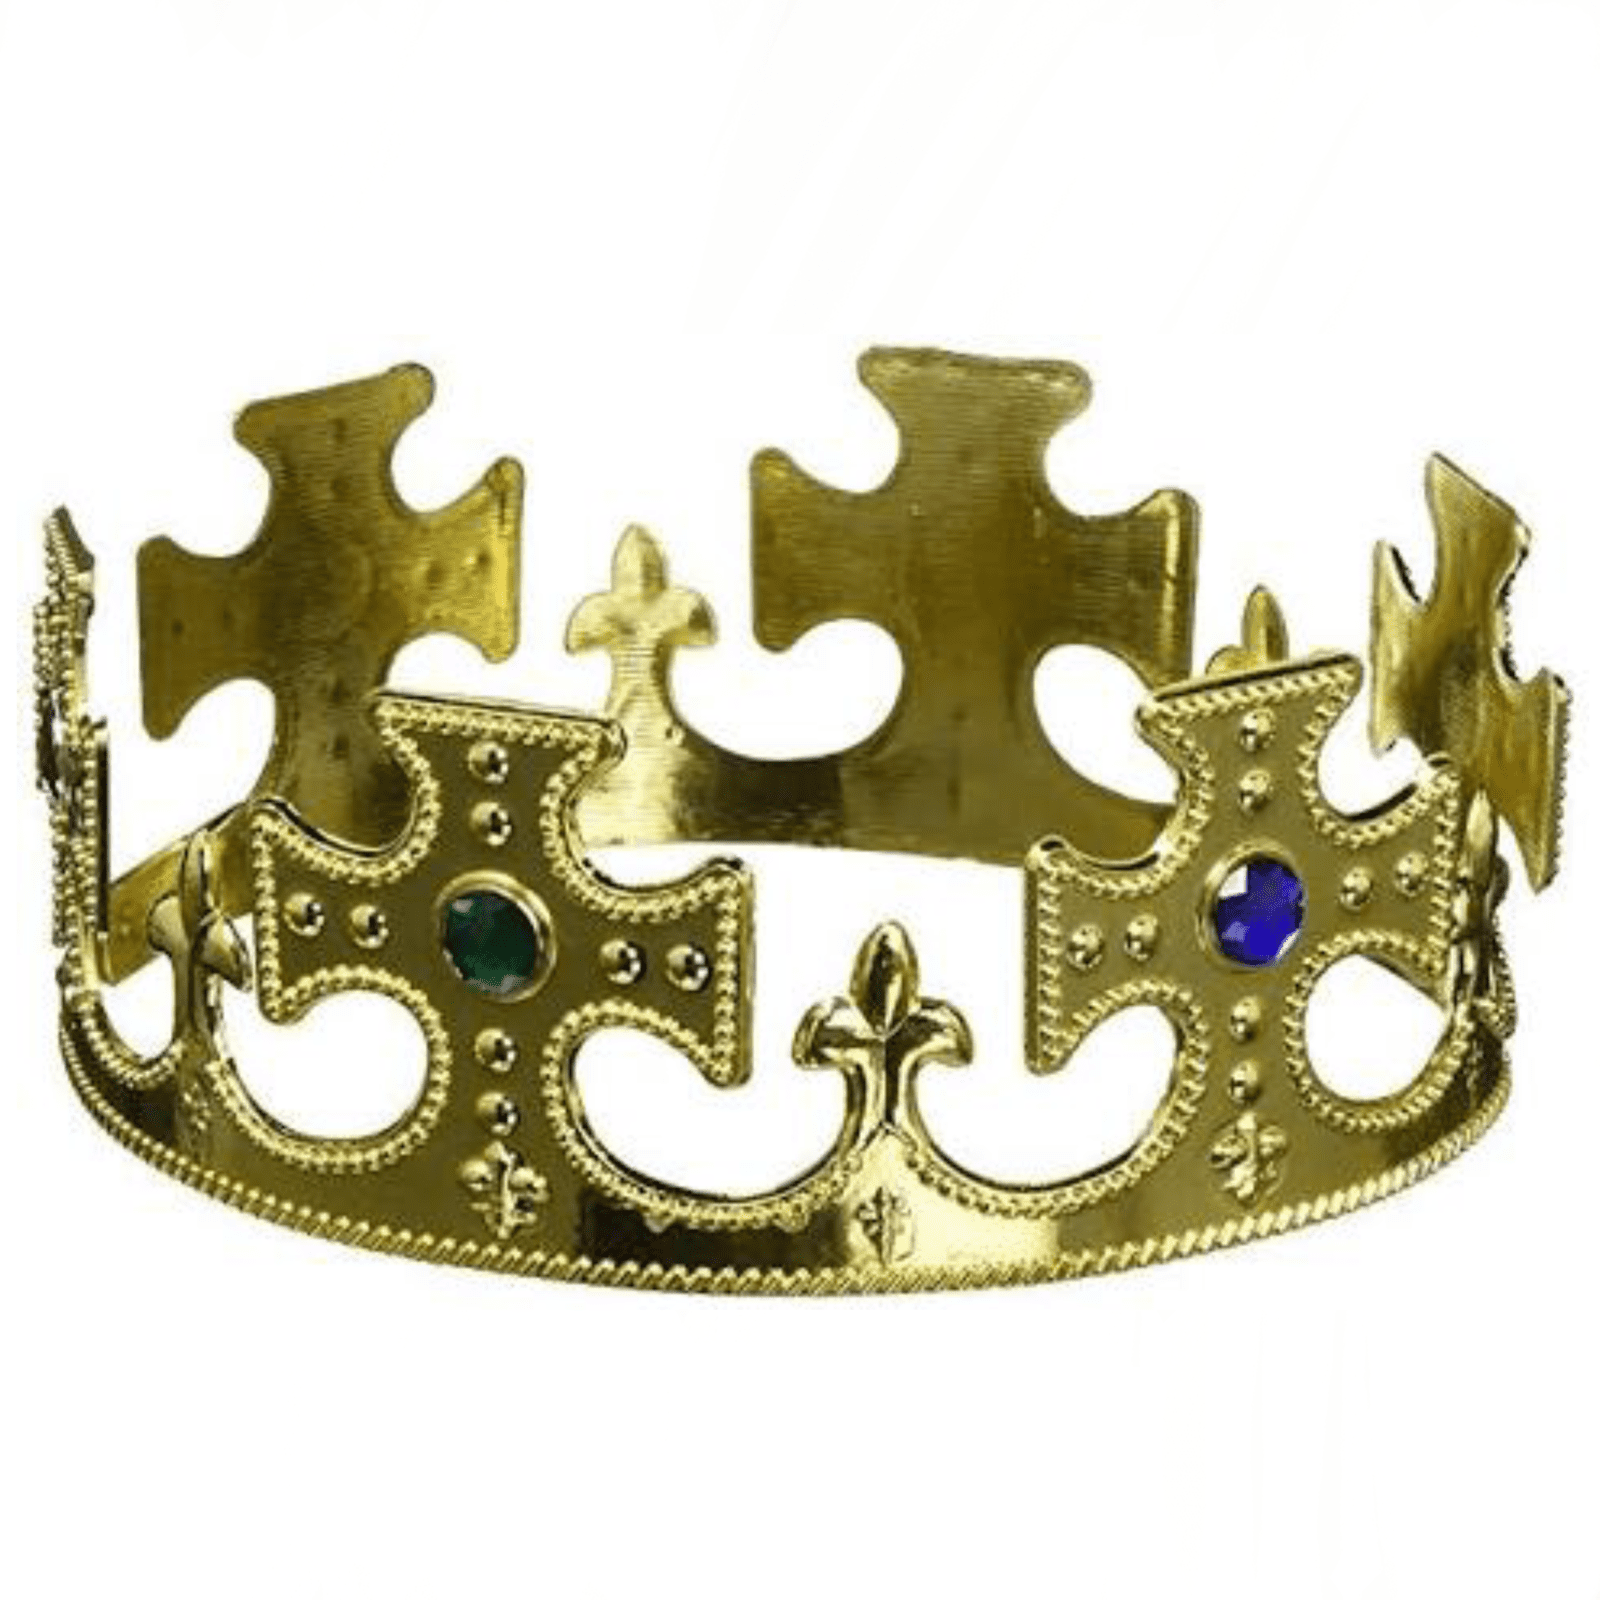 Featured image for “Prince Crown”